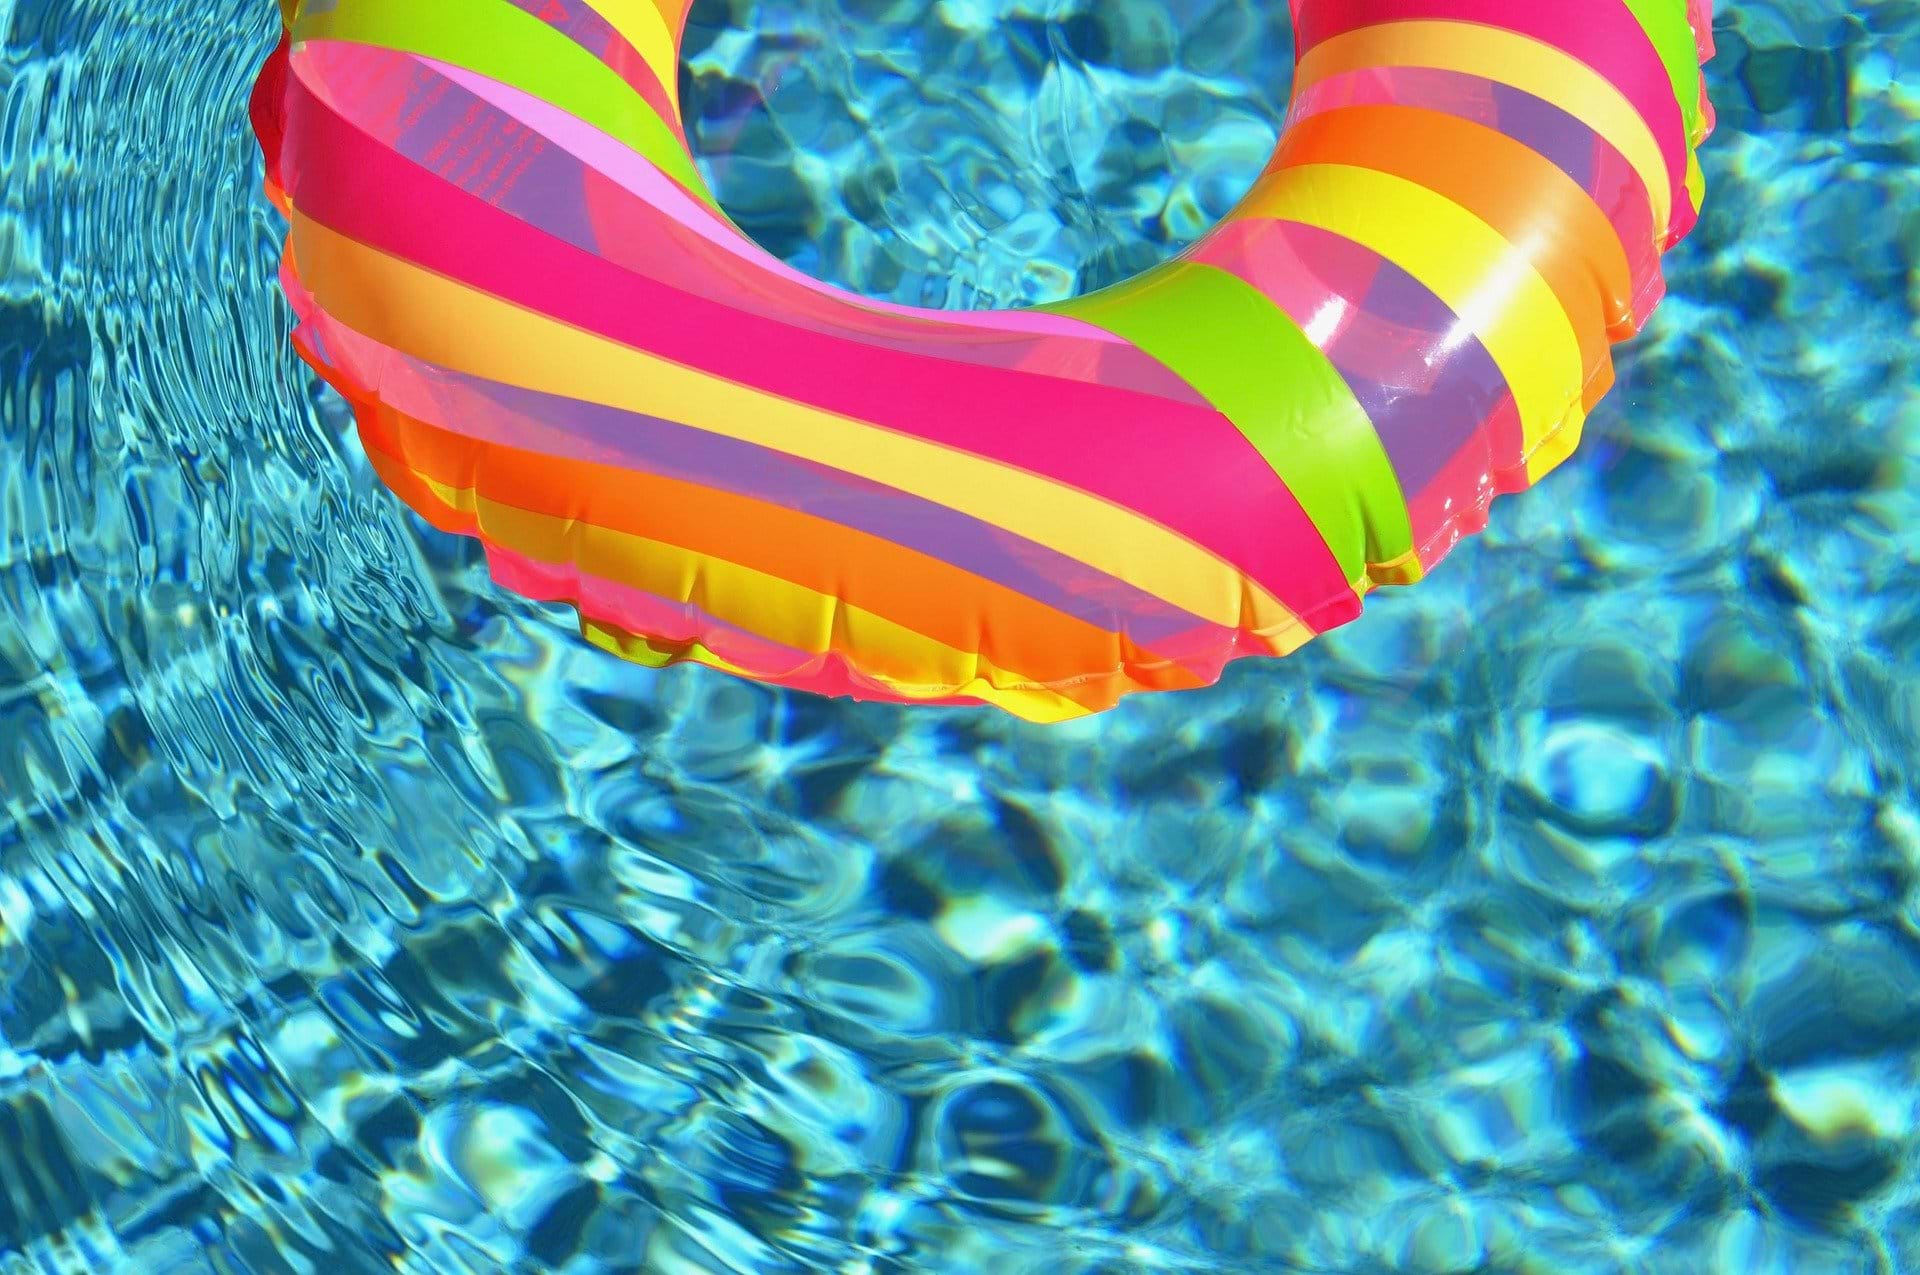 Photo shows a float in pool water.